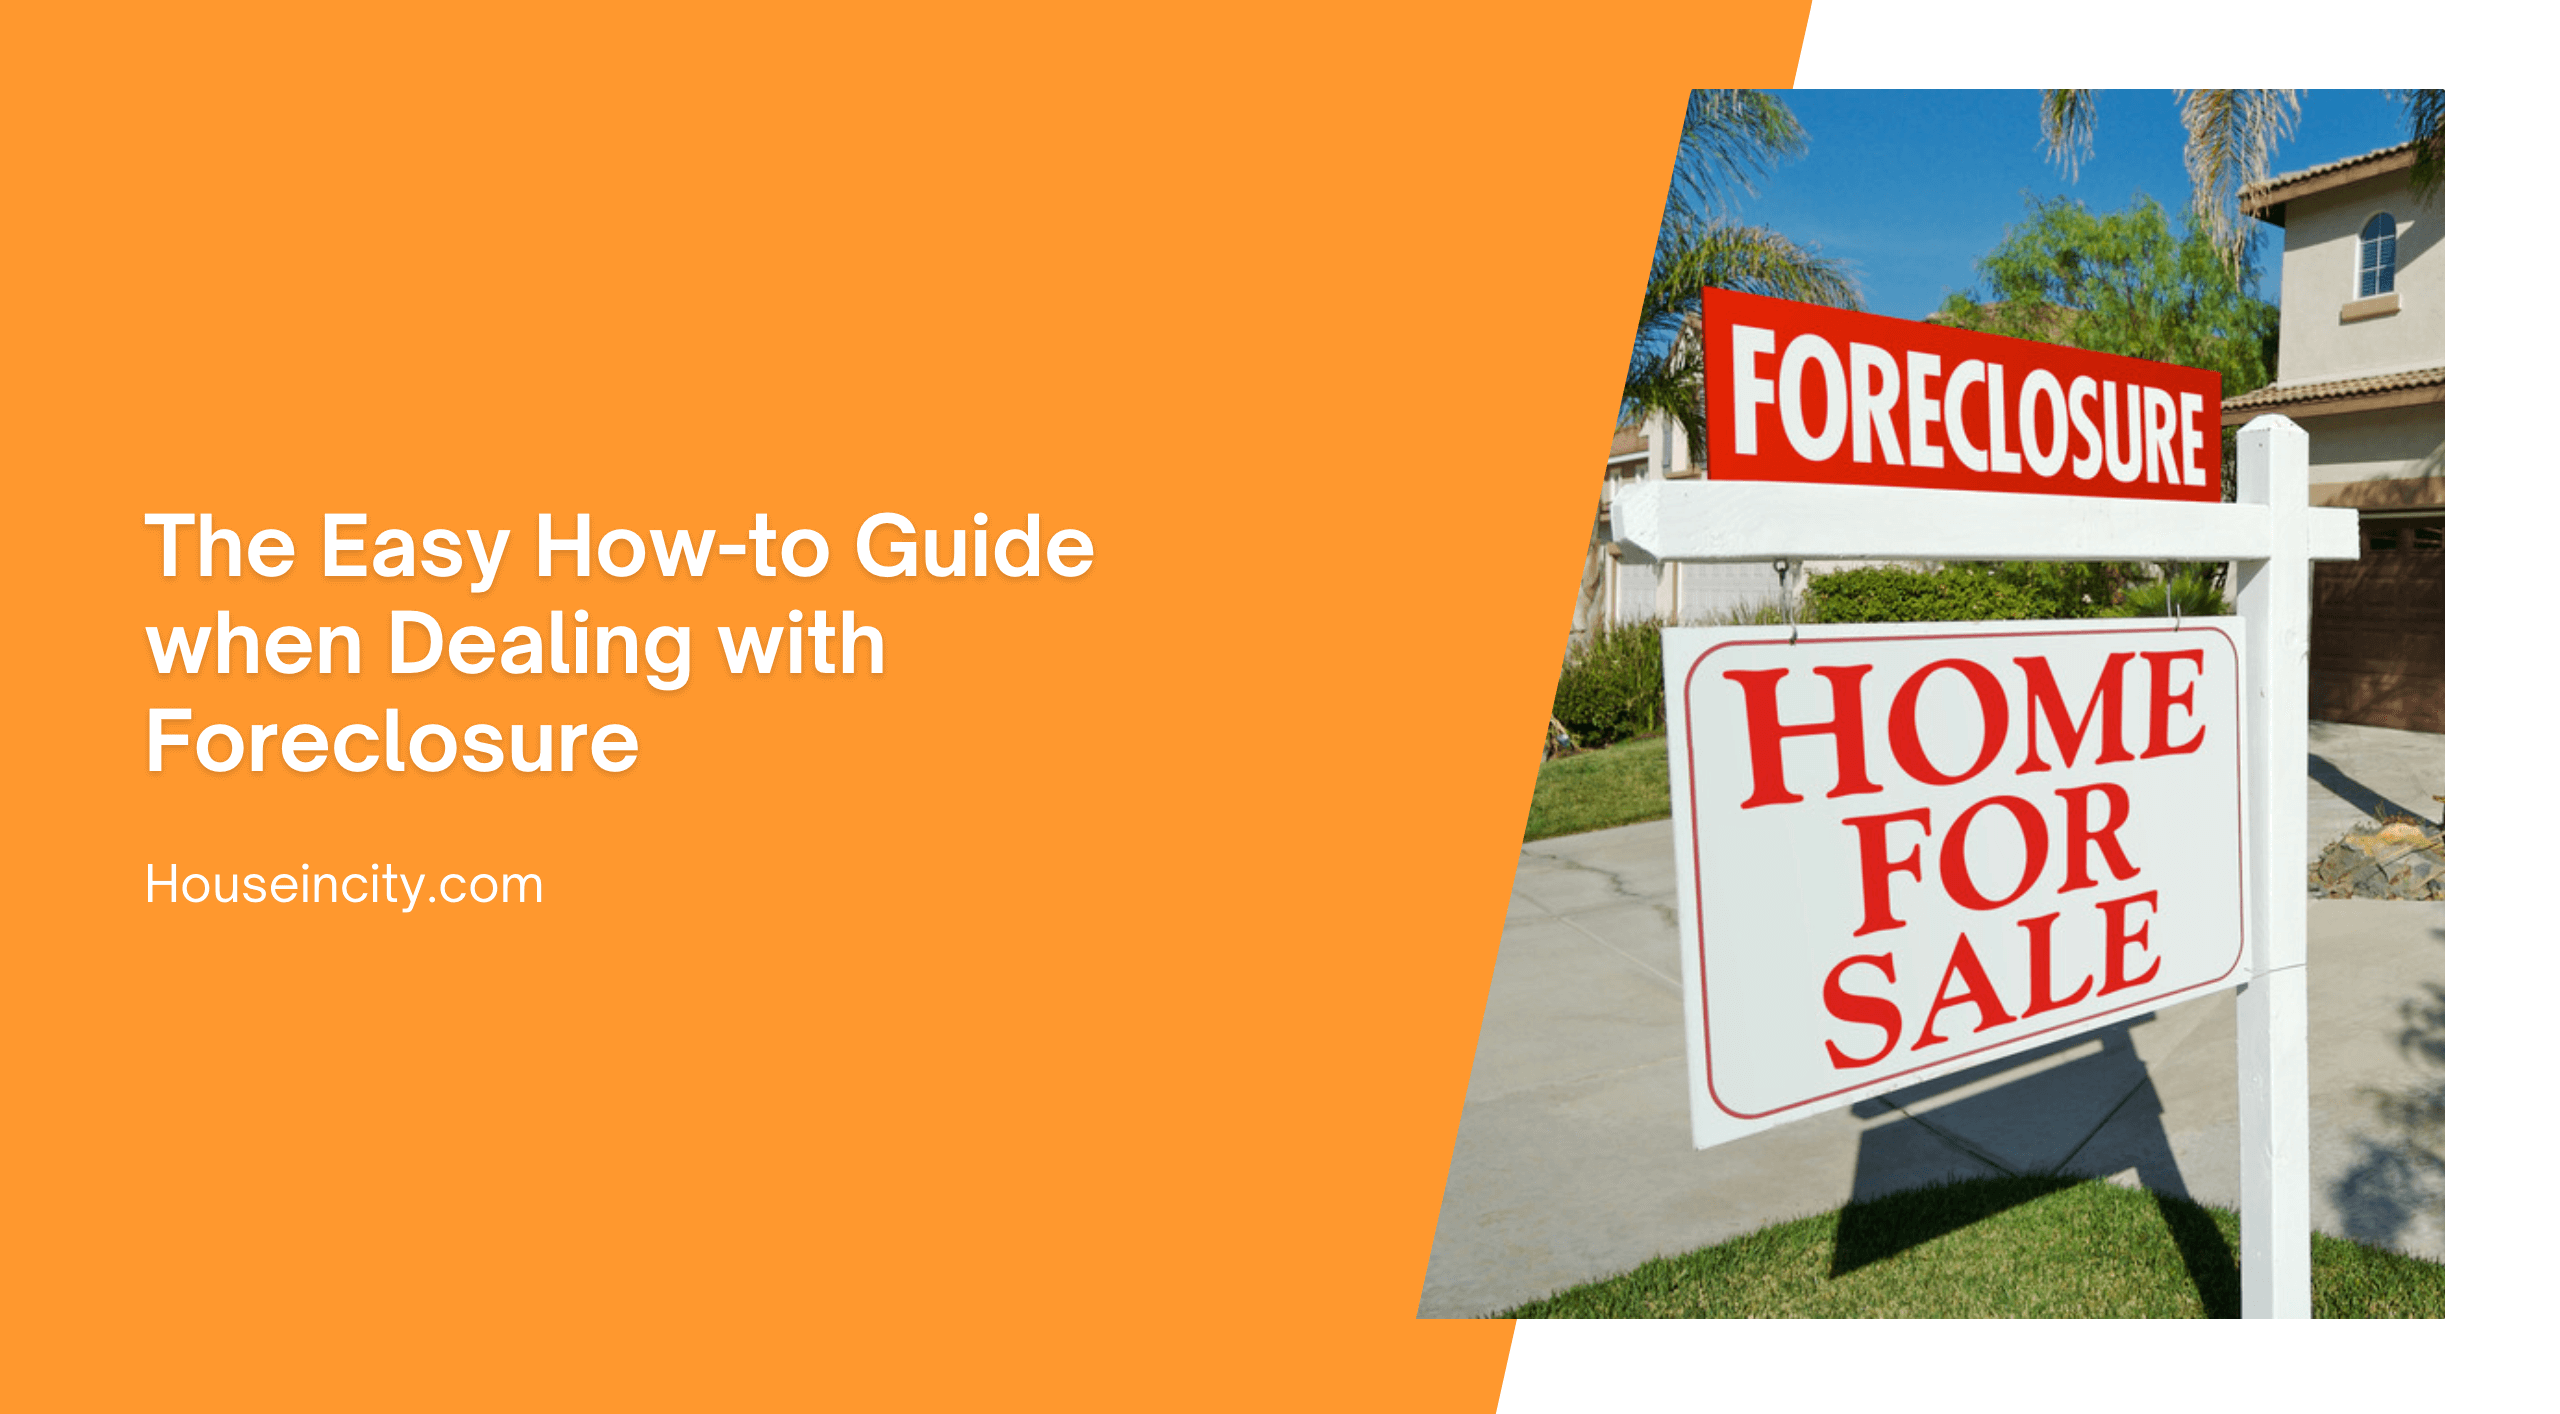 The Easy How-to Guide when Dealing with Foreclosure